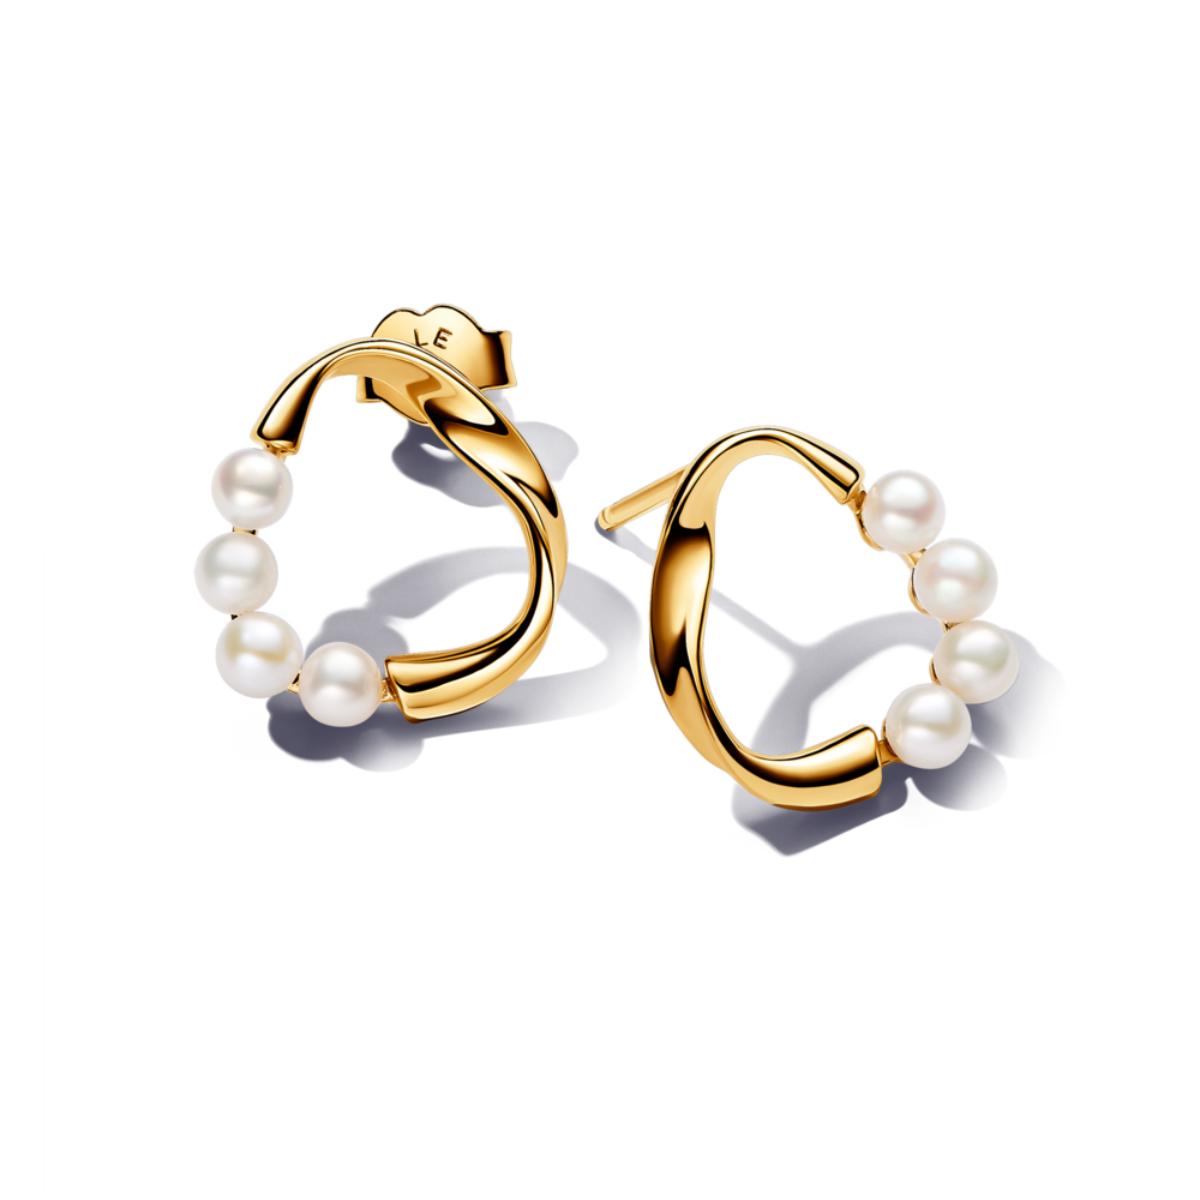 Organically Shaped Circle & Treated Freshwater Cultured Pearls Stud Earrings